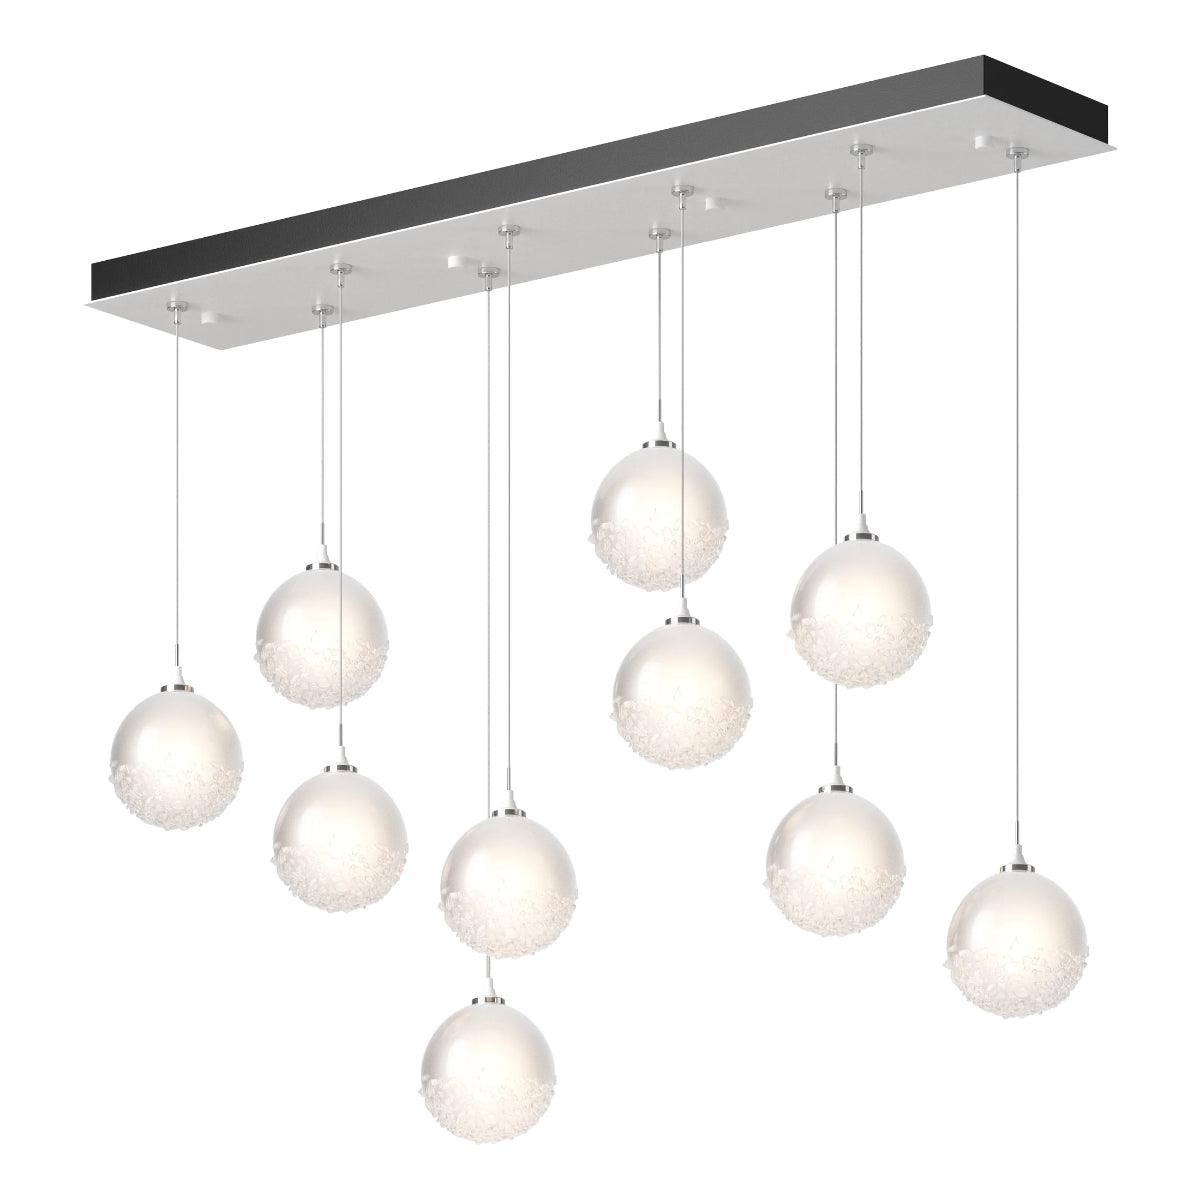 Fritz 45 in. 10 lights Linear Pendant Light with Standard Height - Bees Lighting